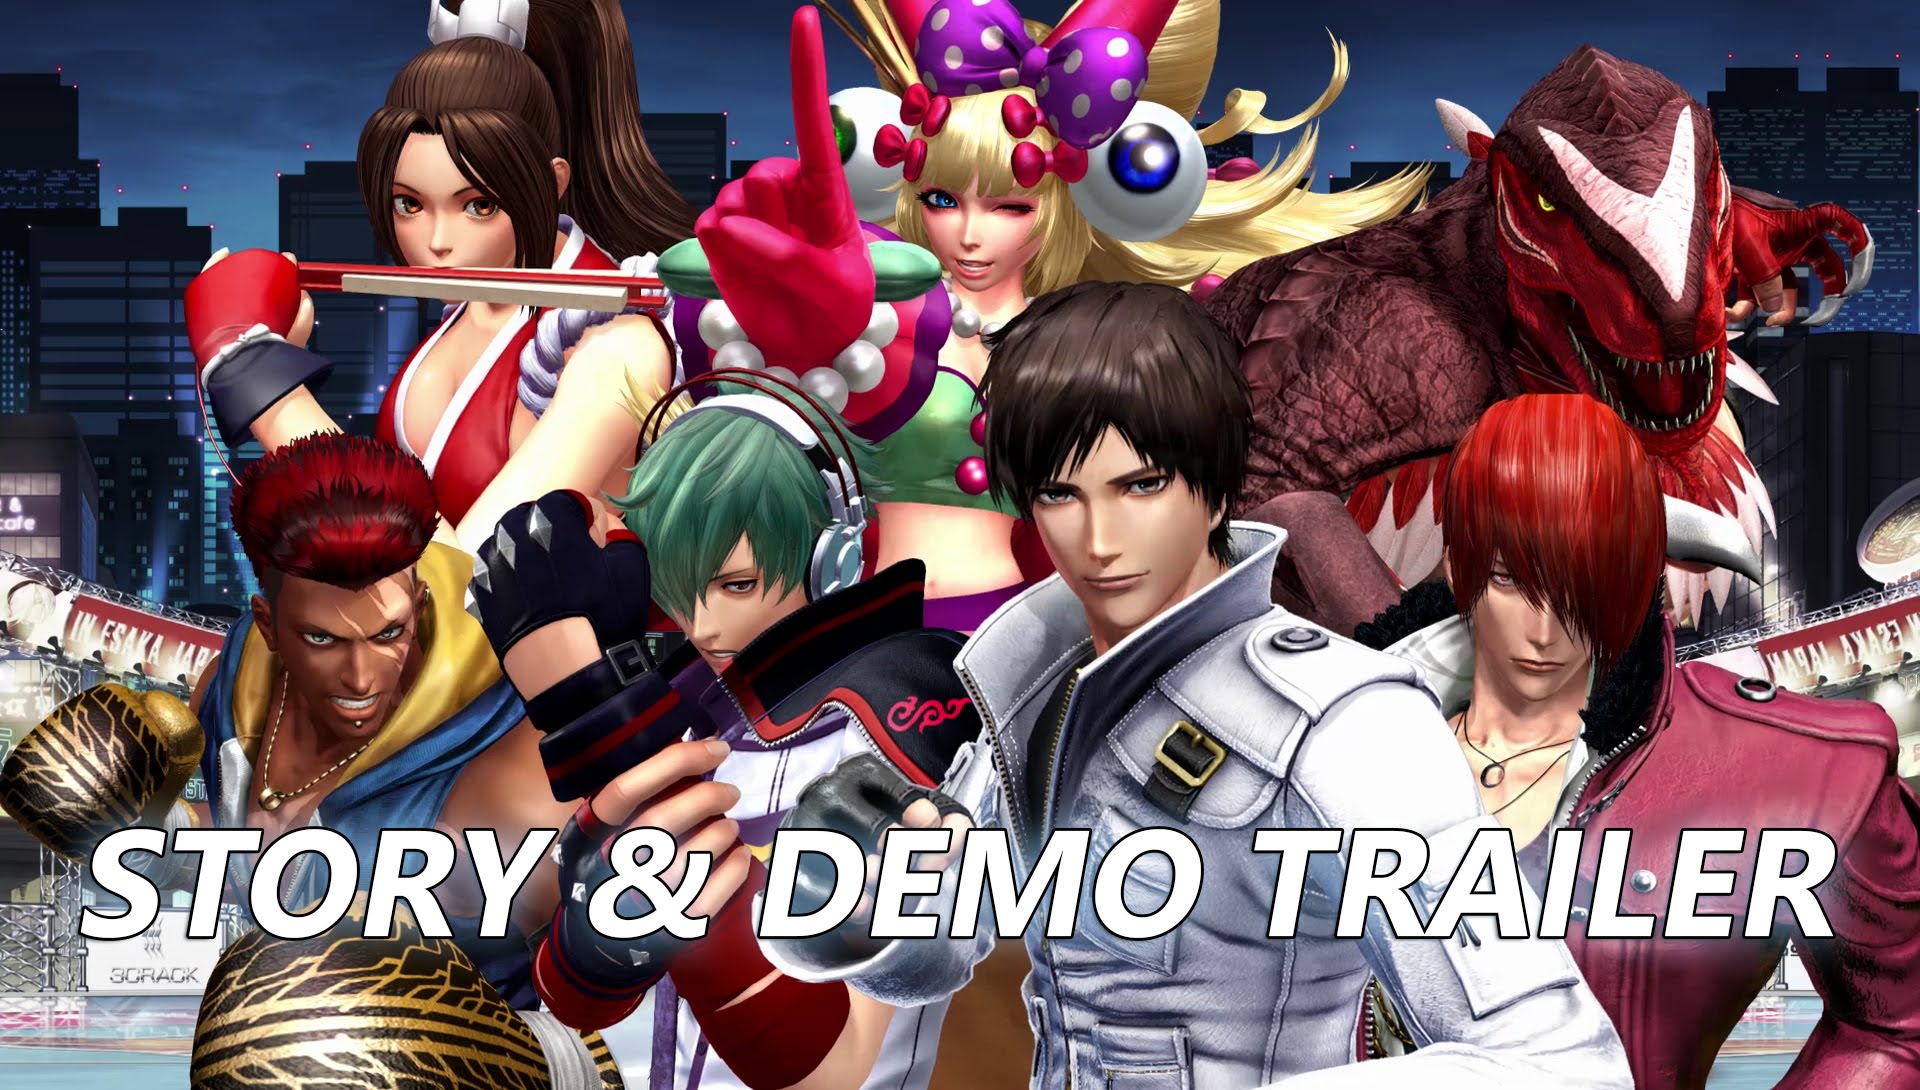 THE KING OF FIGHTERS XIV: Story & Demo Trailer